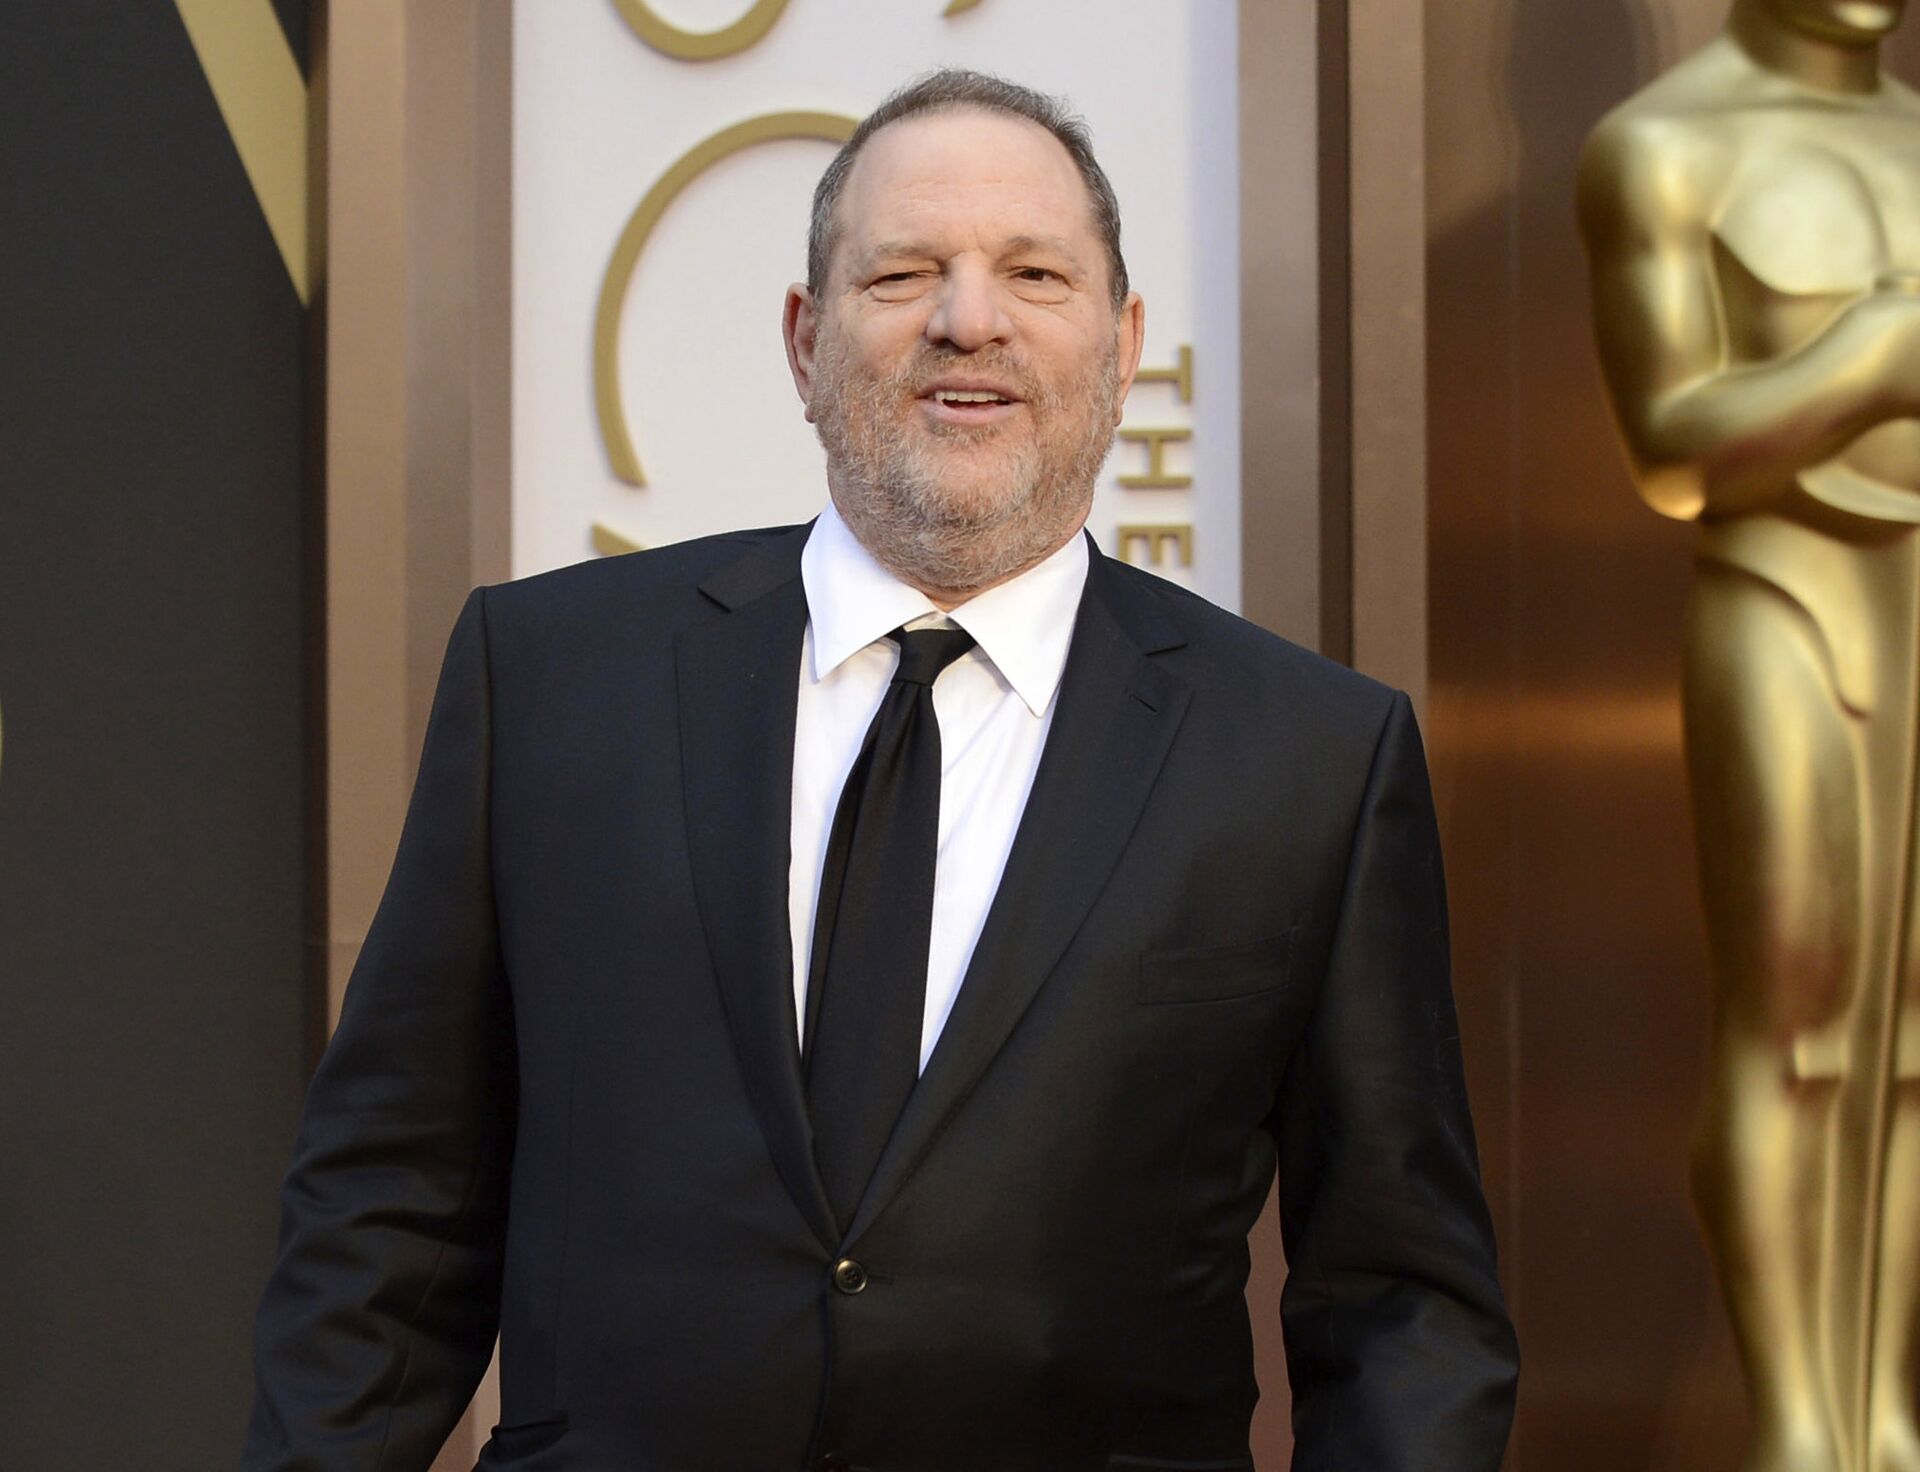 Harvey Weinstein 'Technically Blind', 'Losing His Teeth' in Prison, Lawyers Fighting Extradition Say - Sputnik International, 1920, 13.04.2021